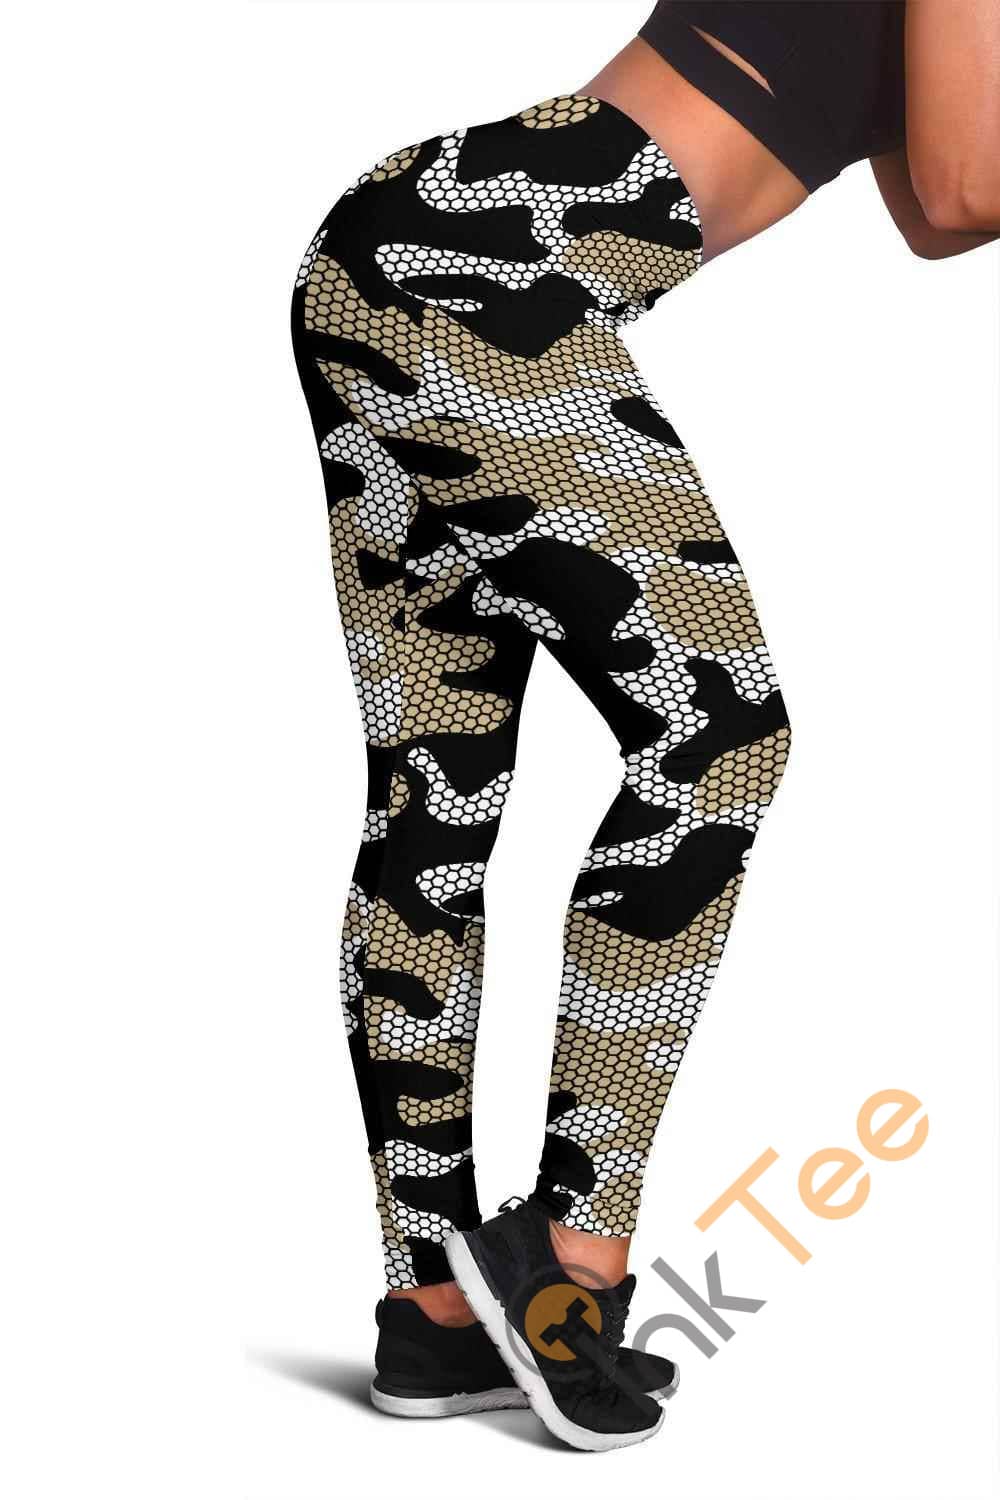 Inktee Store - New Orleans Saints Inspired Hex Camo 3D All Over Print For Yoga Fitness Fashion Women'S Leggings Image